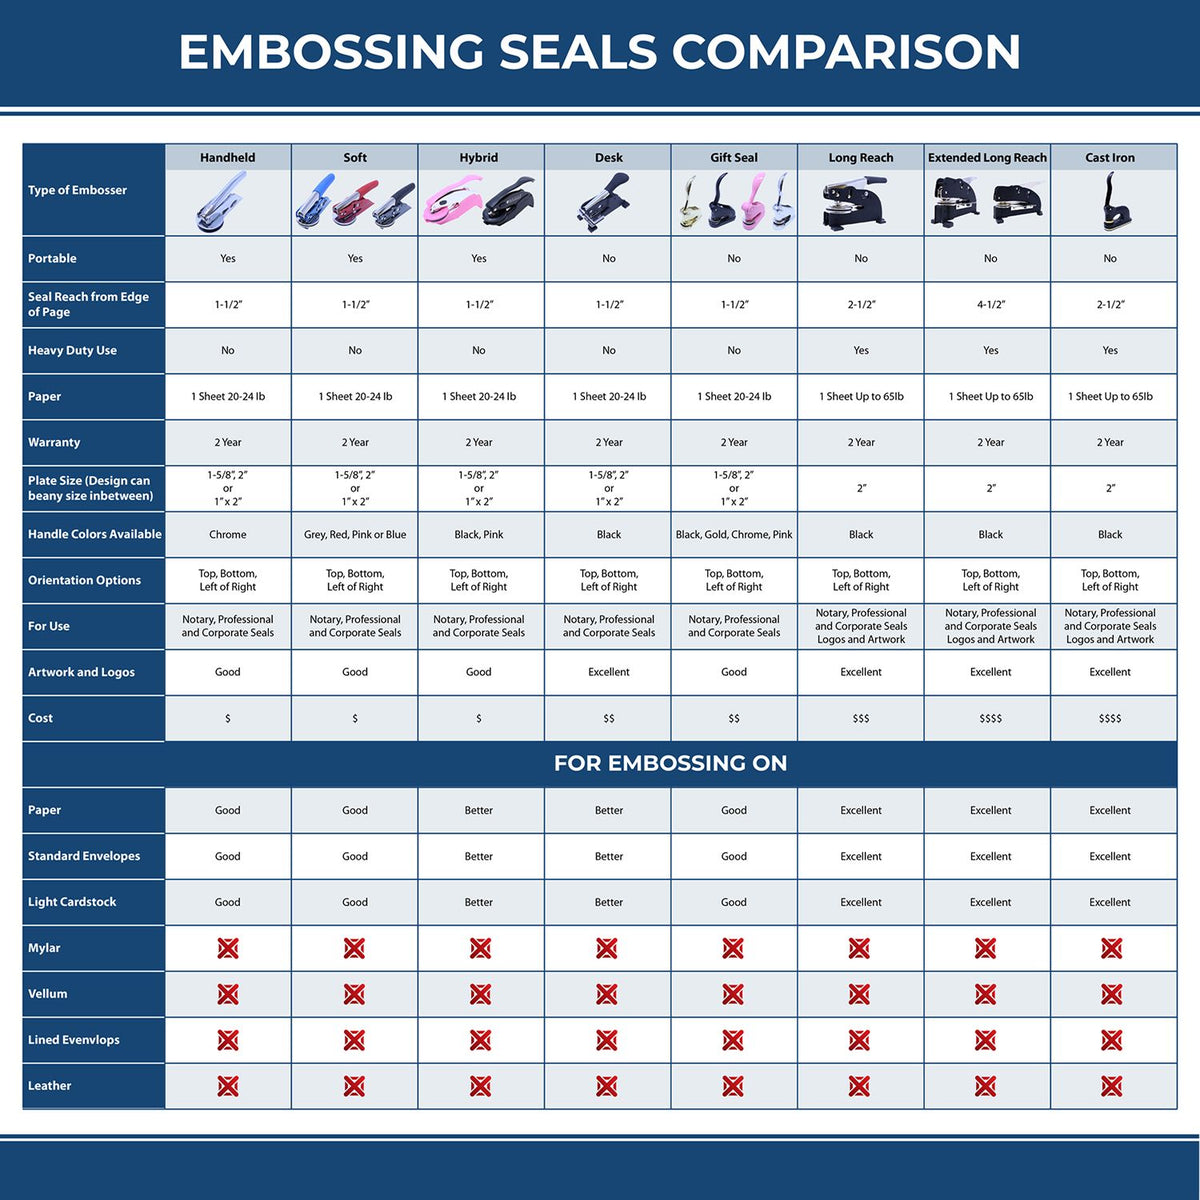 A comparison chart for the different types of mount models available for the Handheld Louisiana Land Surveyor Seal.